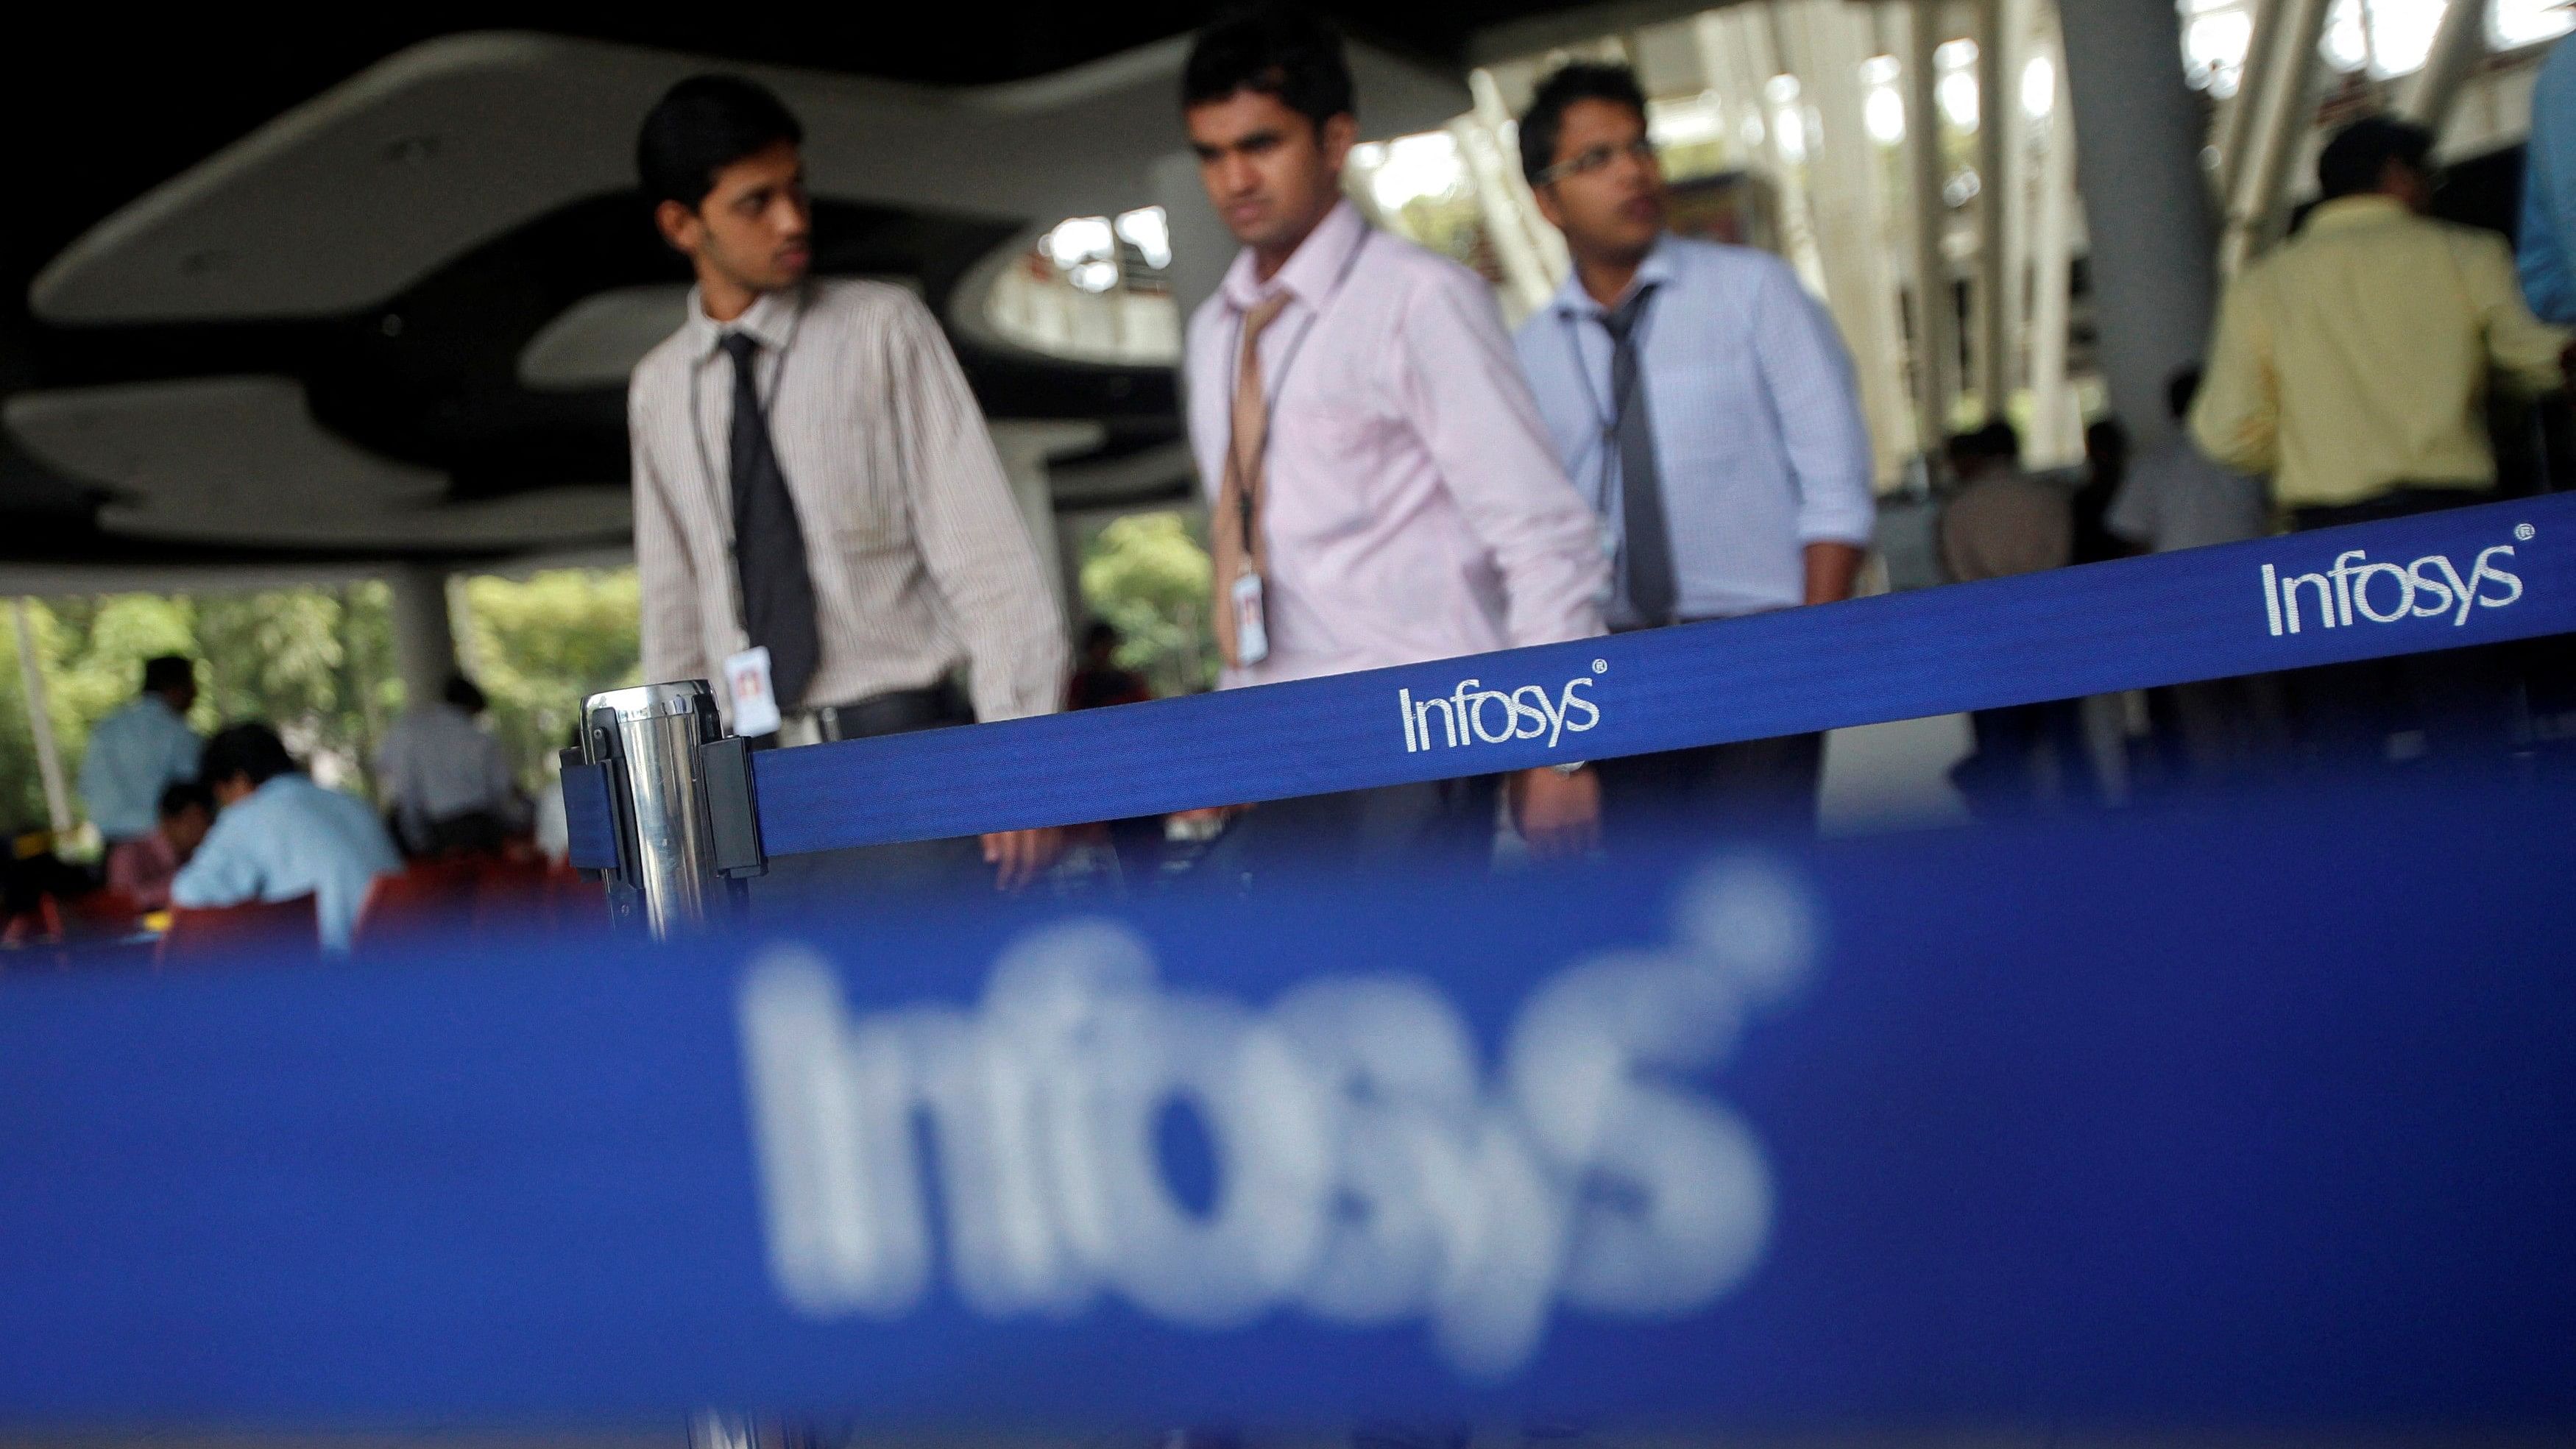 <div class="paragraphs"><p>Employees of Indian software company Infosys walk past Infosys logos at their campus in the Electronic City area in Bangalore.&nbsp;</p></div>